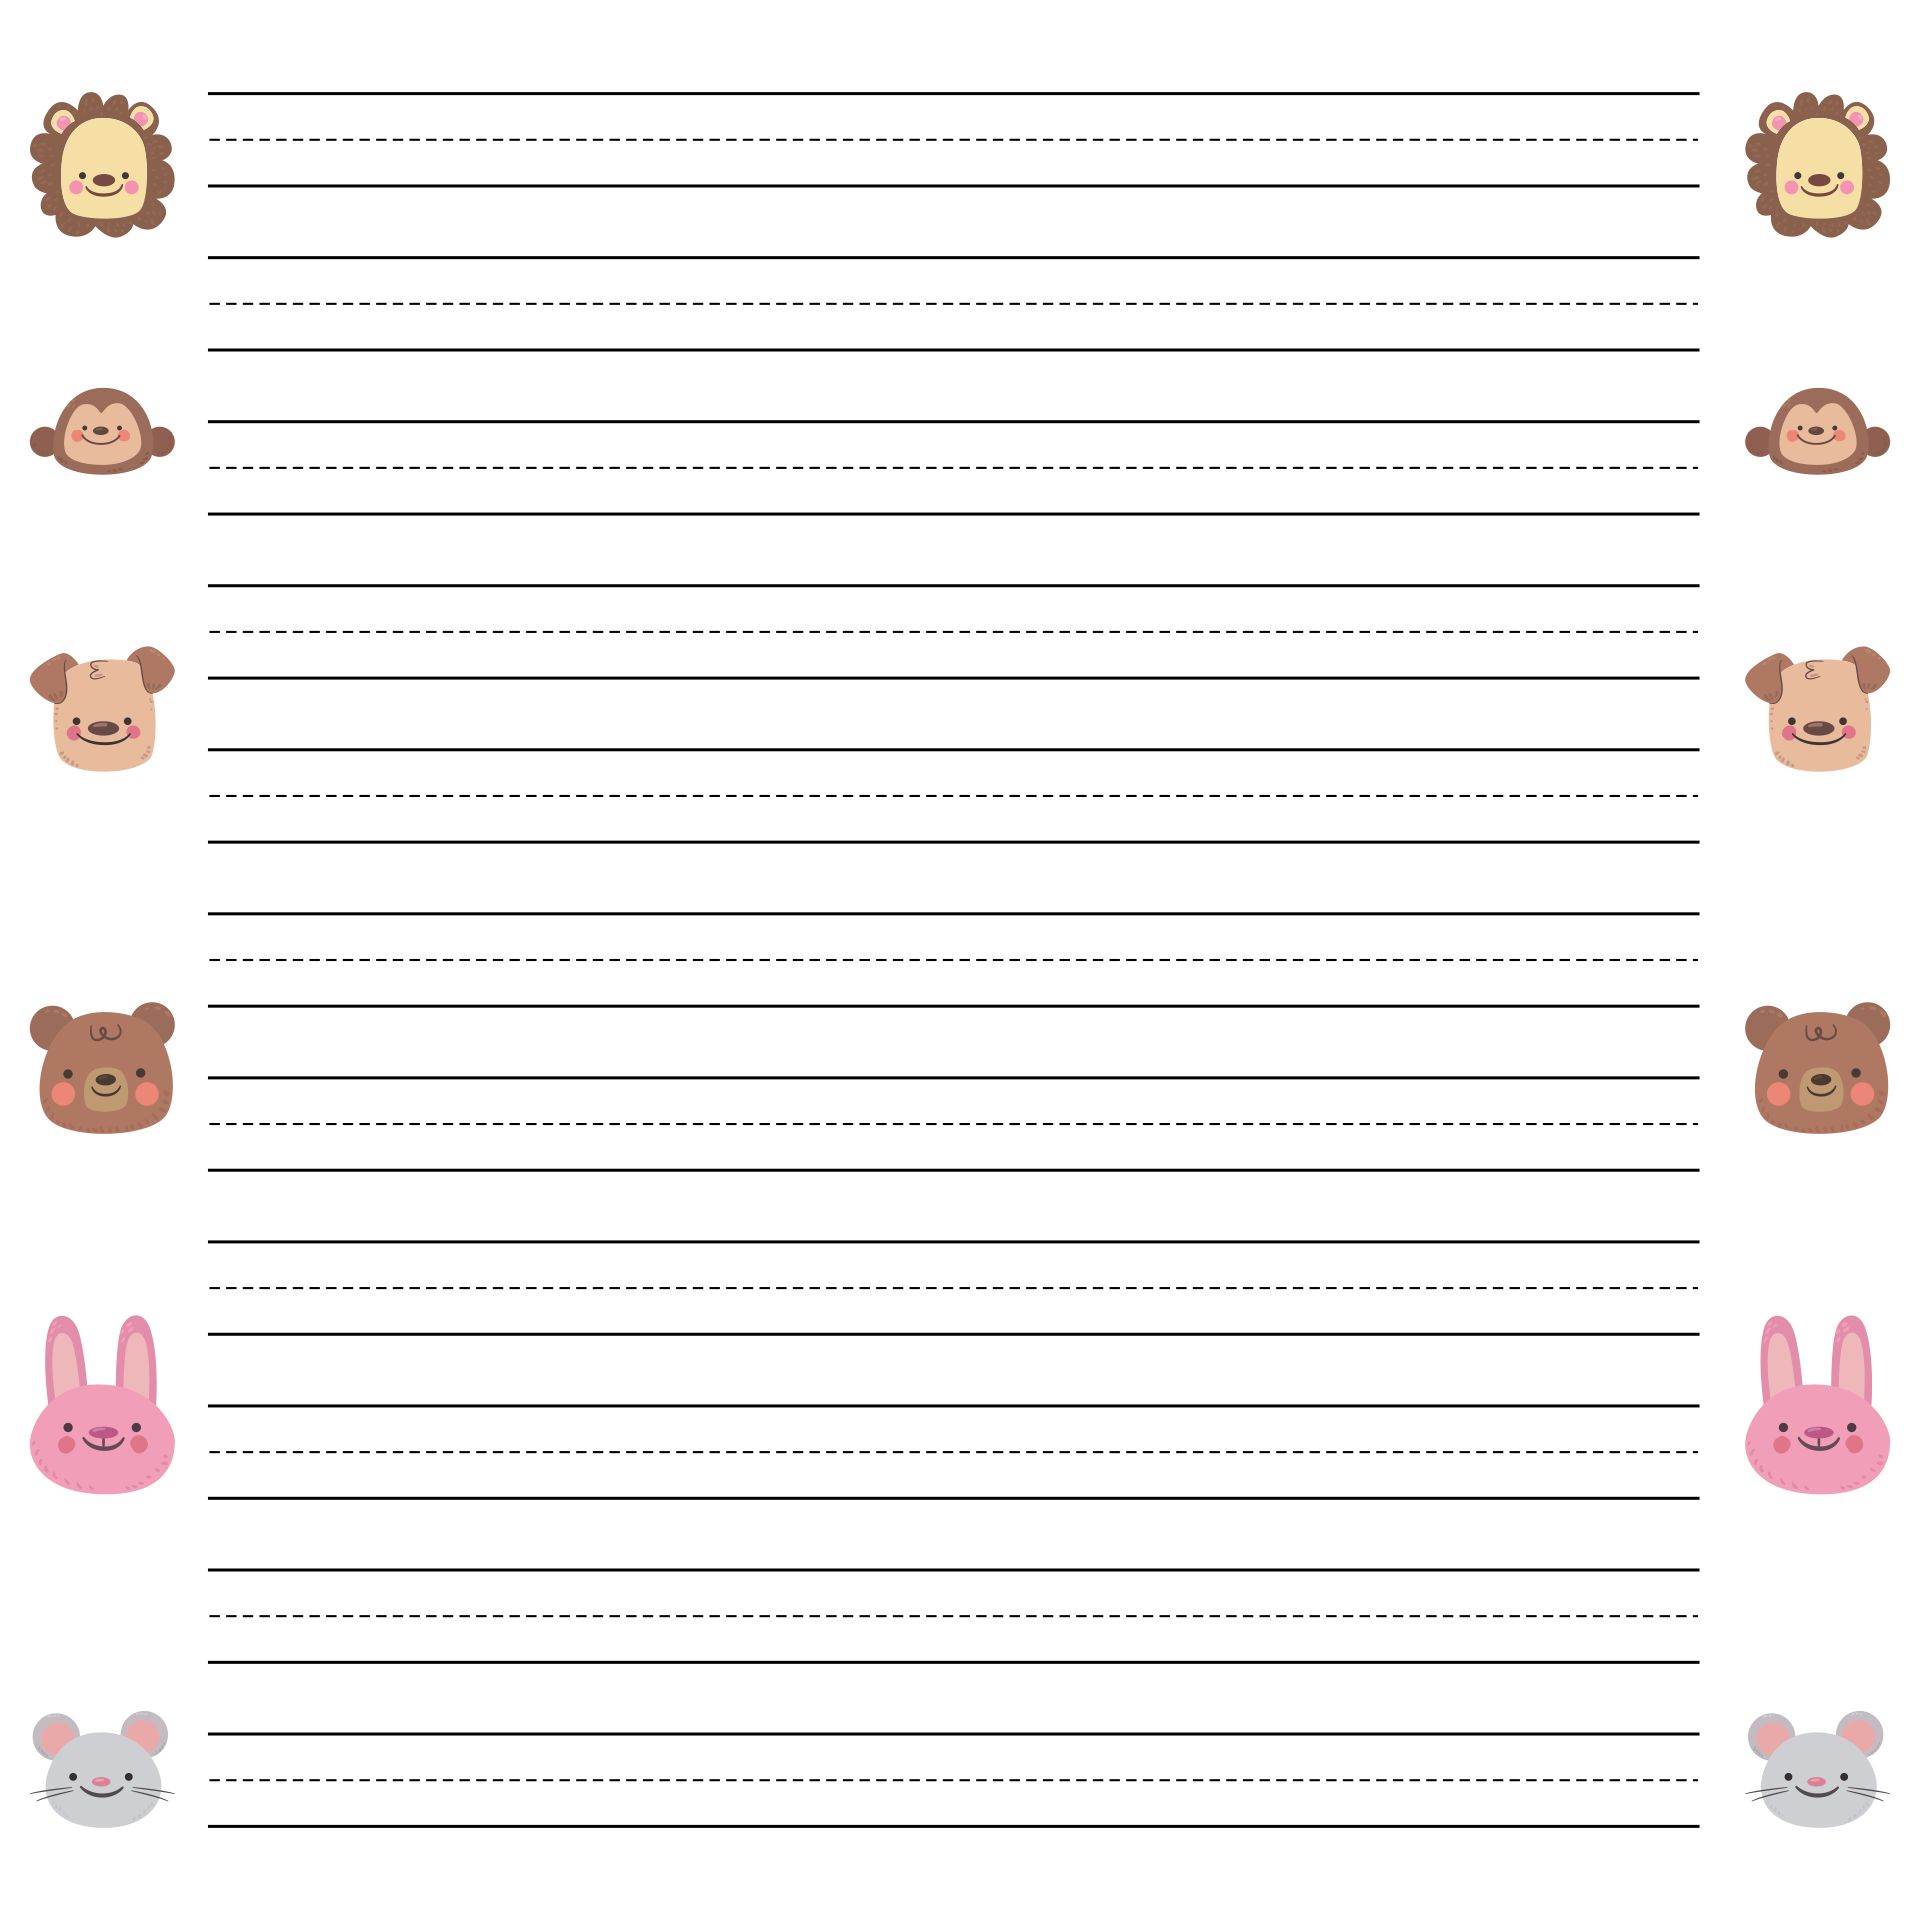 Free Printable Lined Writing Paper Template - Printable Templates